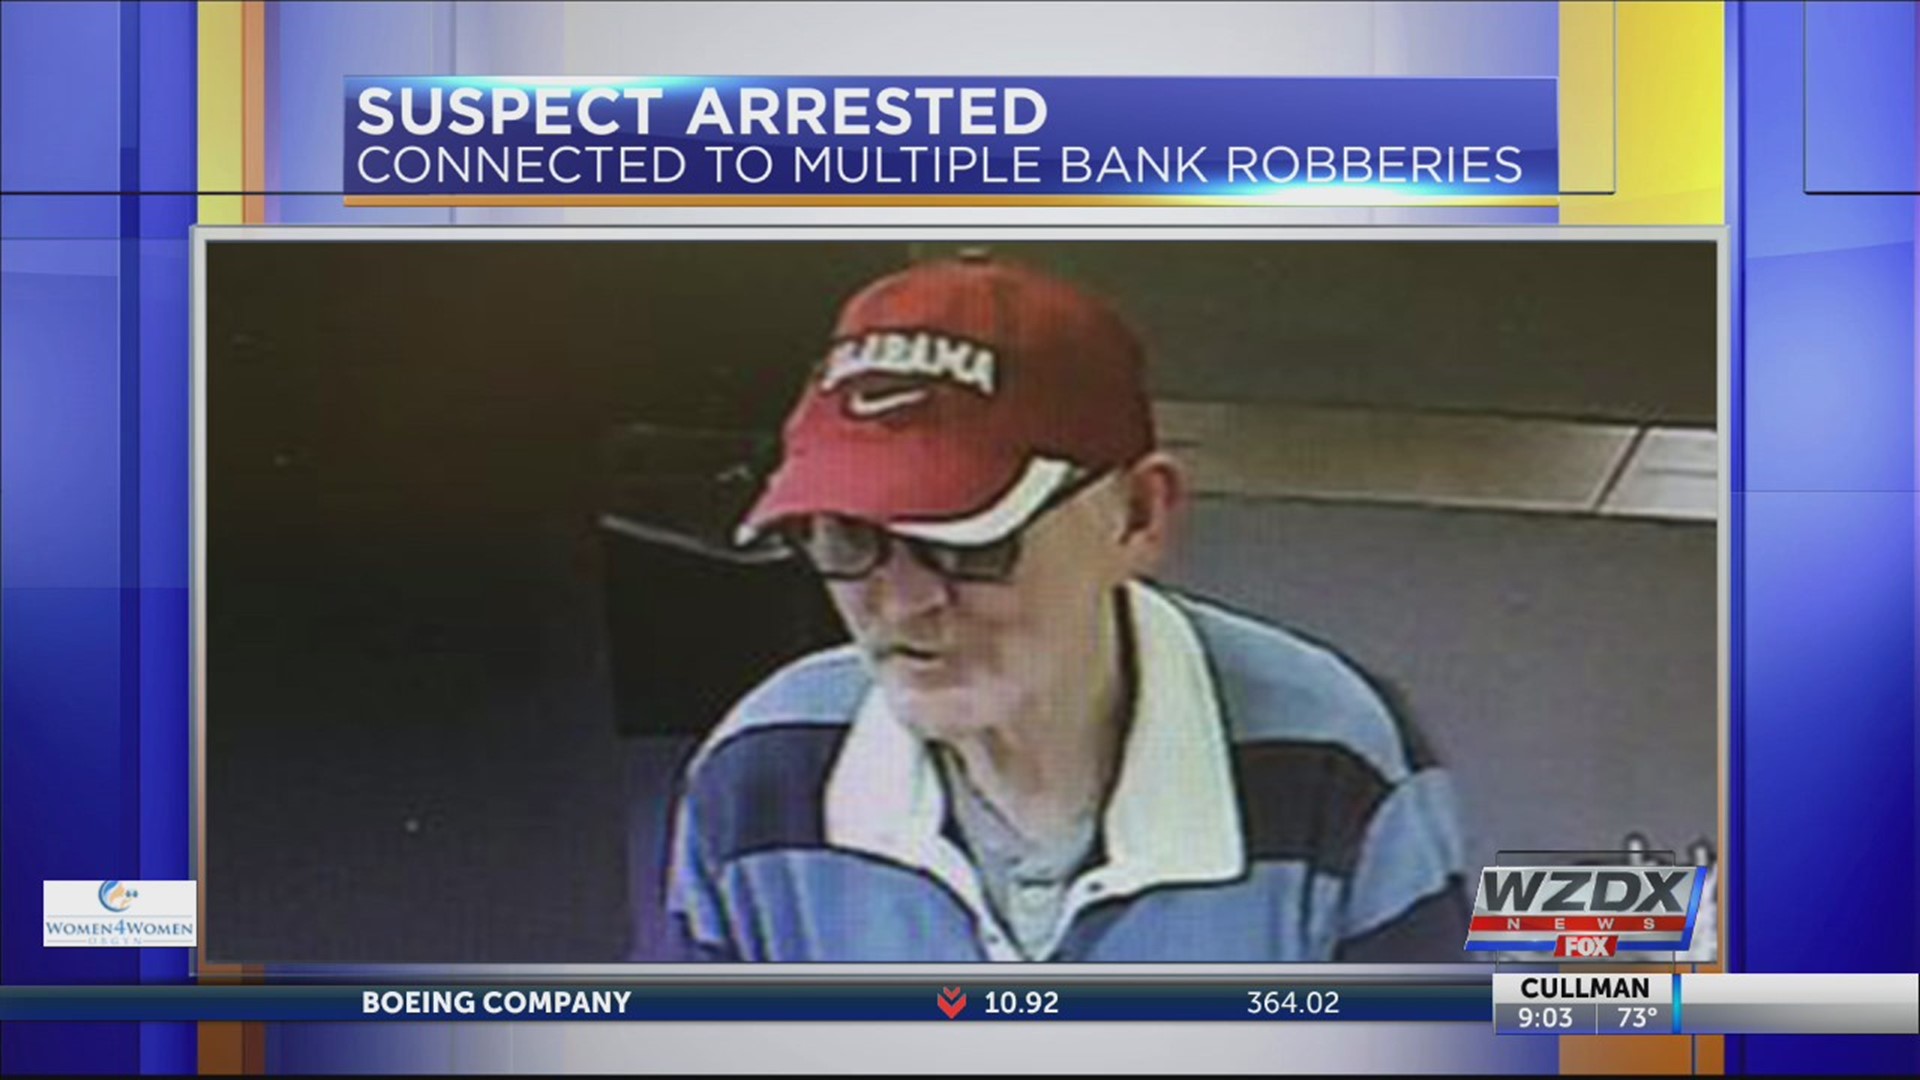 A man wanted on multiple bank robberies over the last few years has been arrested at a home in Florence.